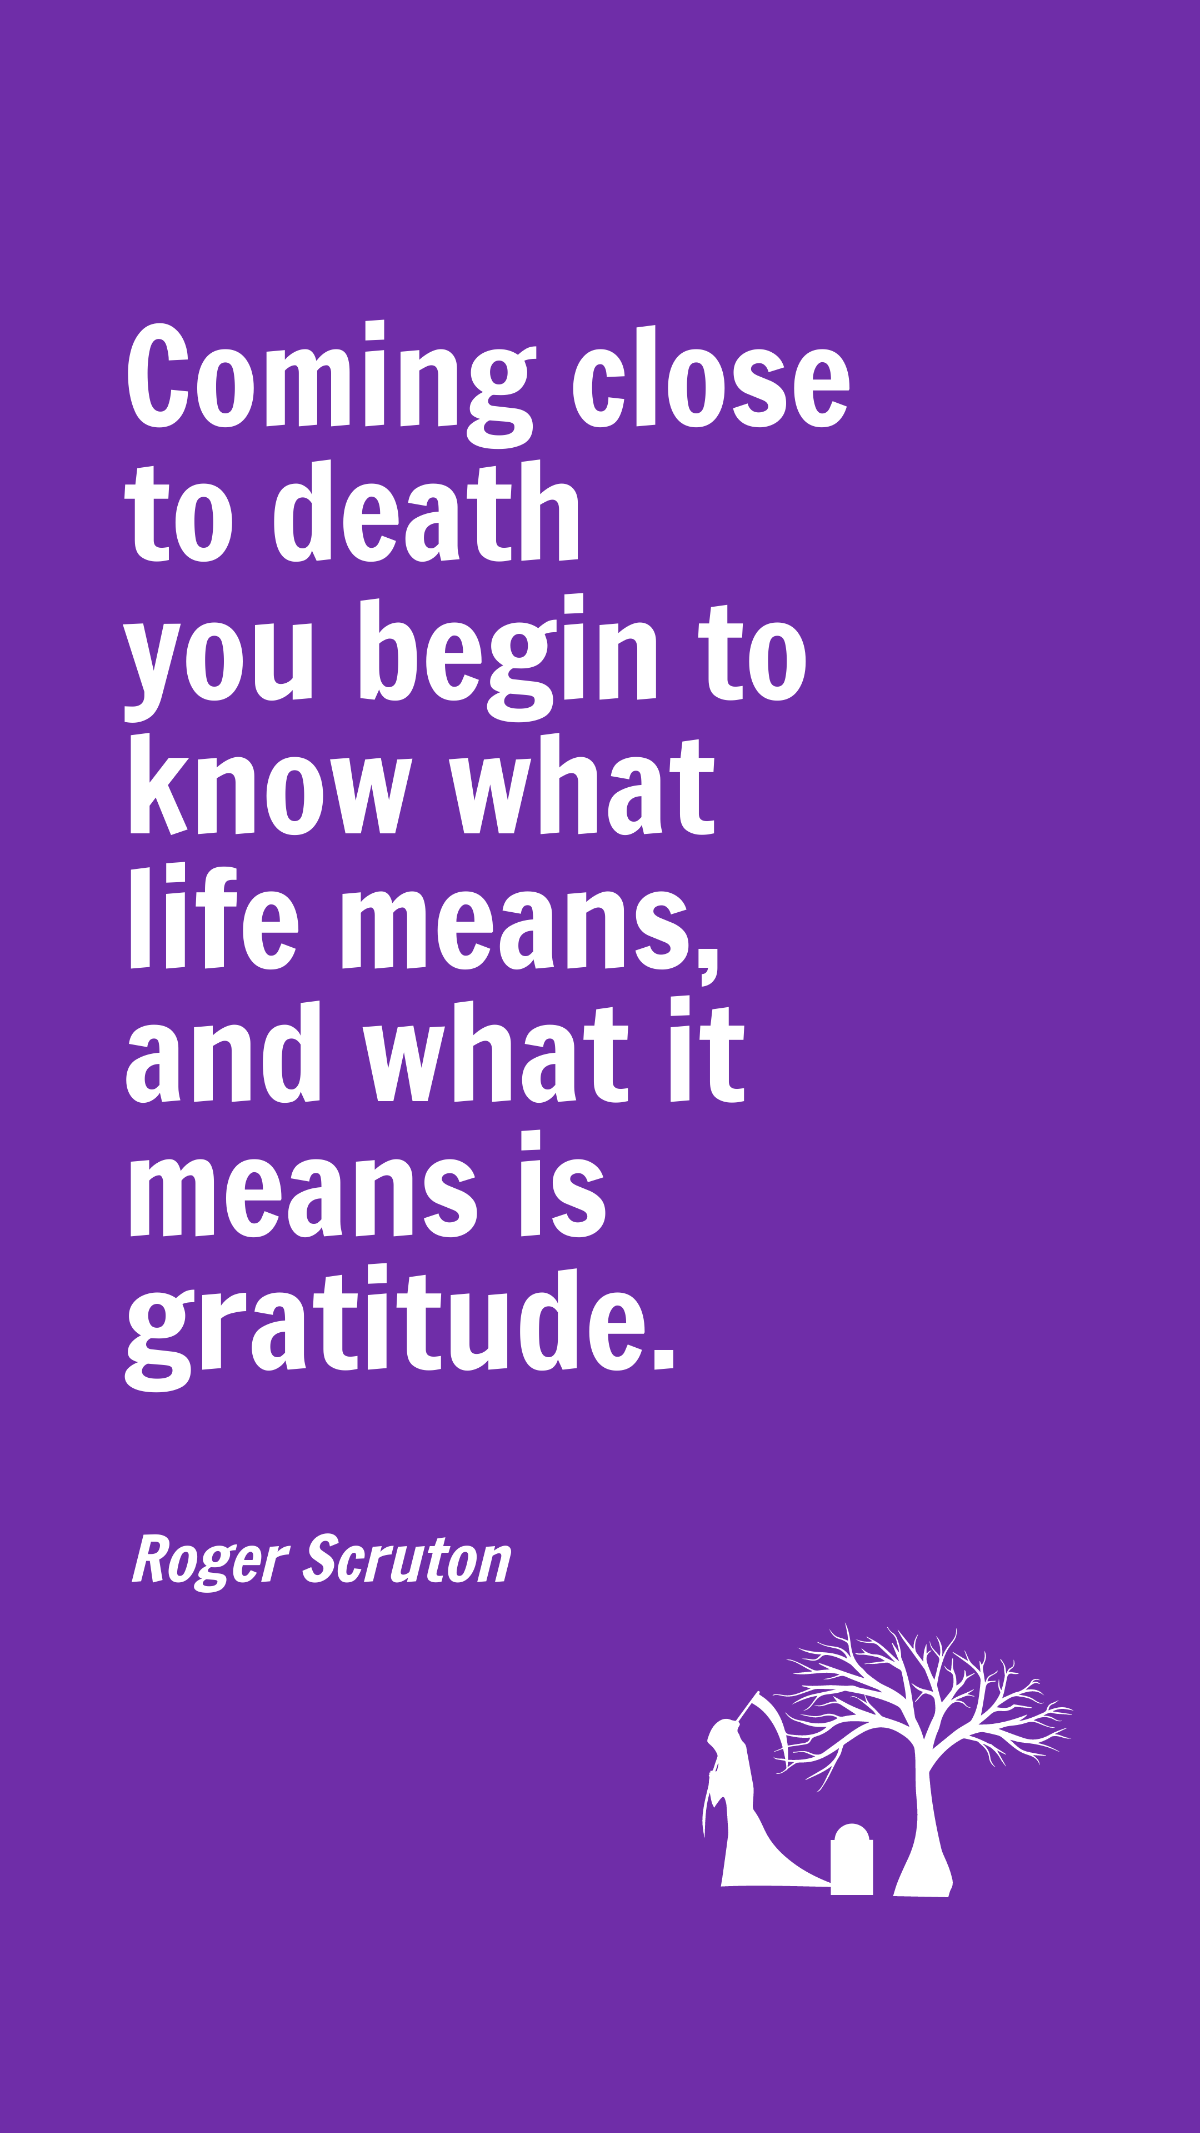 Free Roger Scruton - Coming close to death you begin to know what life means, and what it means is gratitude. Template